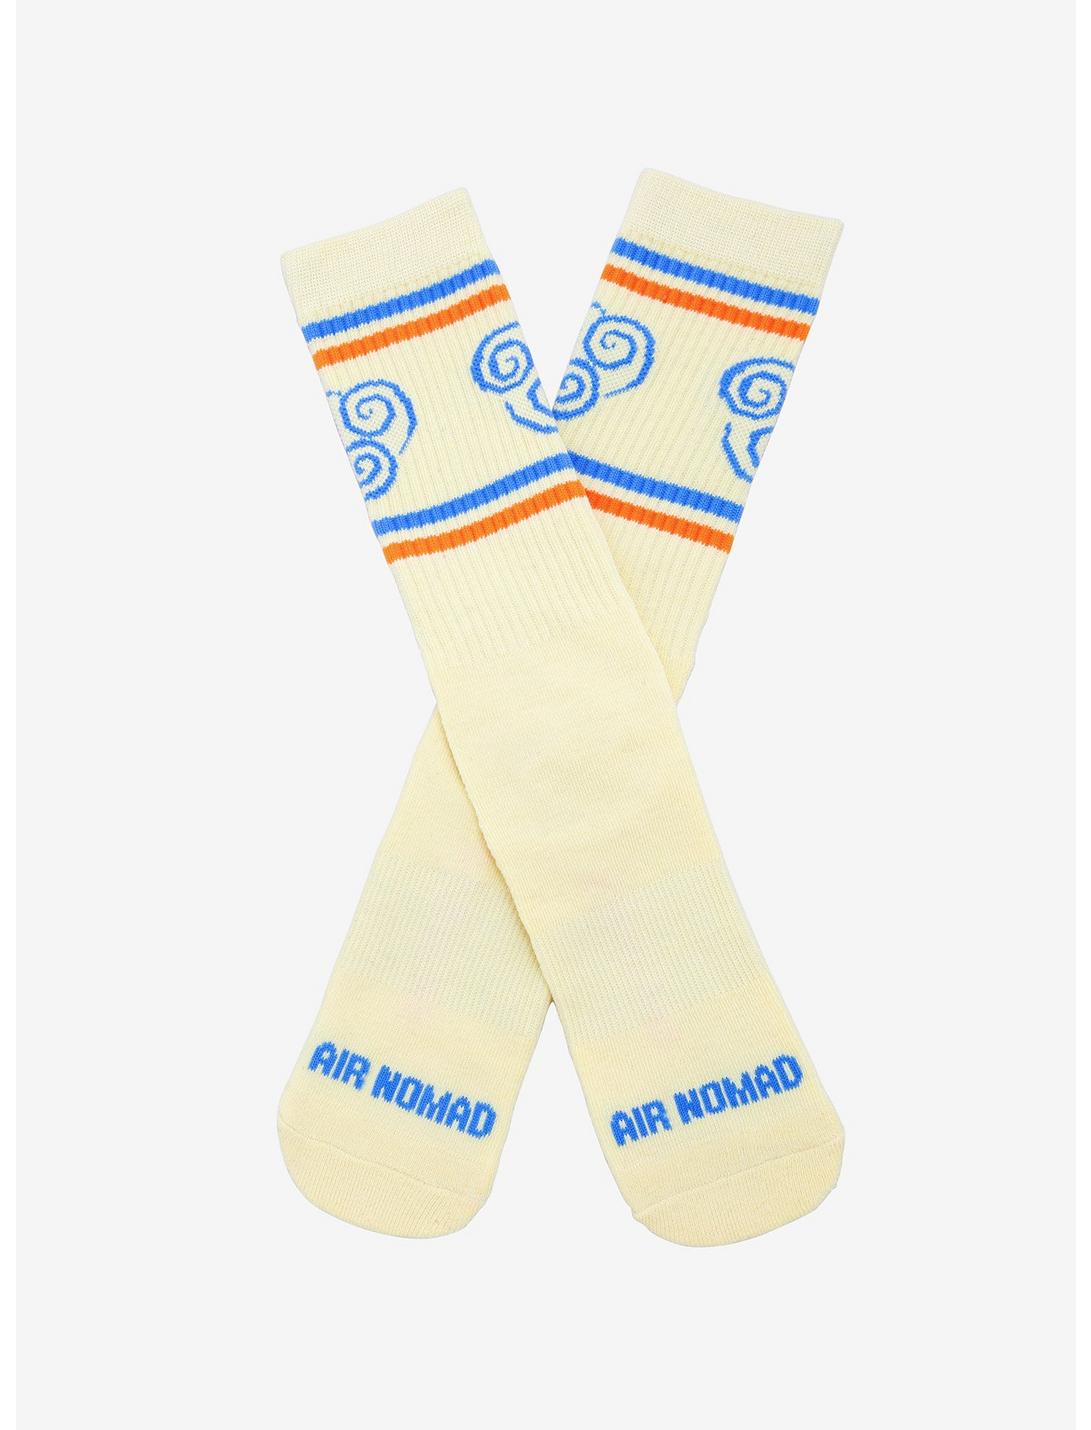 Avatar: The Last Airbender Air Nomad Crew Socks - BoxLunch Exclusive, , hi-res